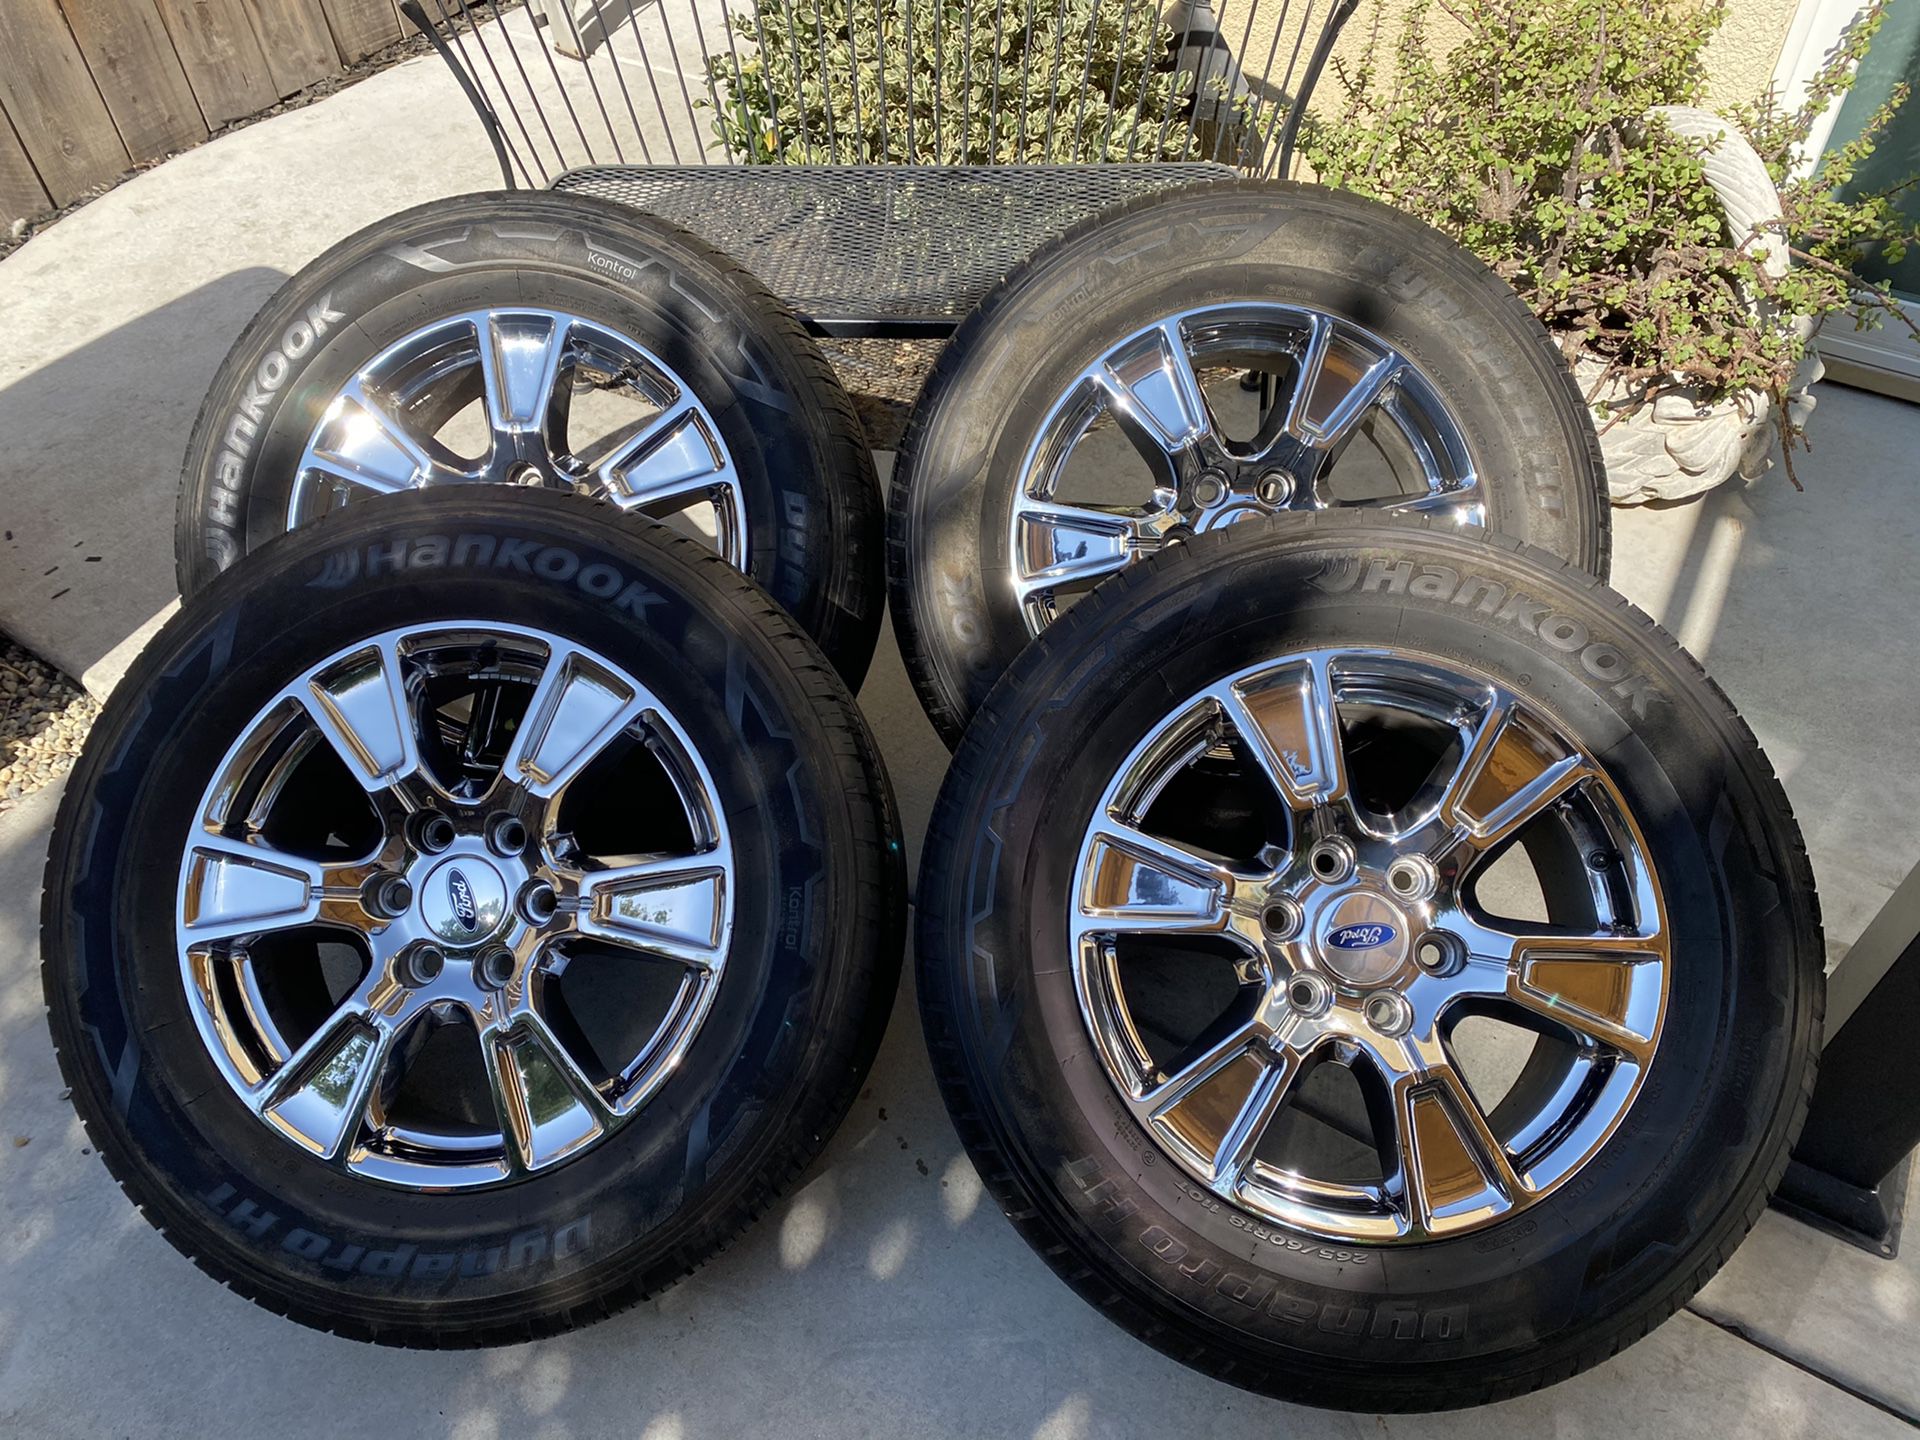 Set of 4 Ford Wheels & Tires, Like NEW